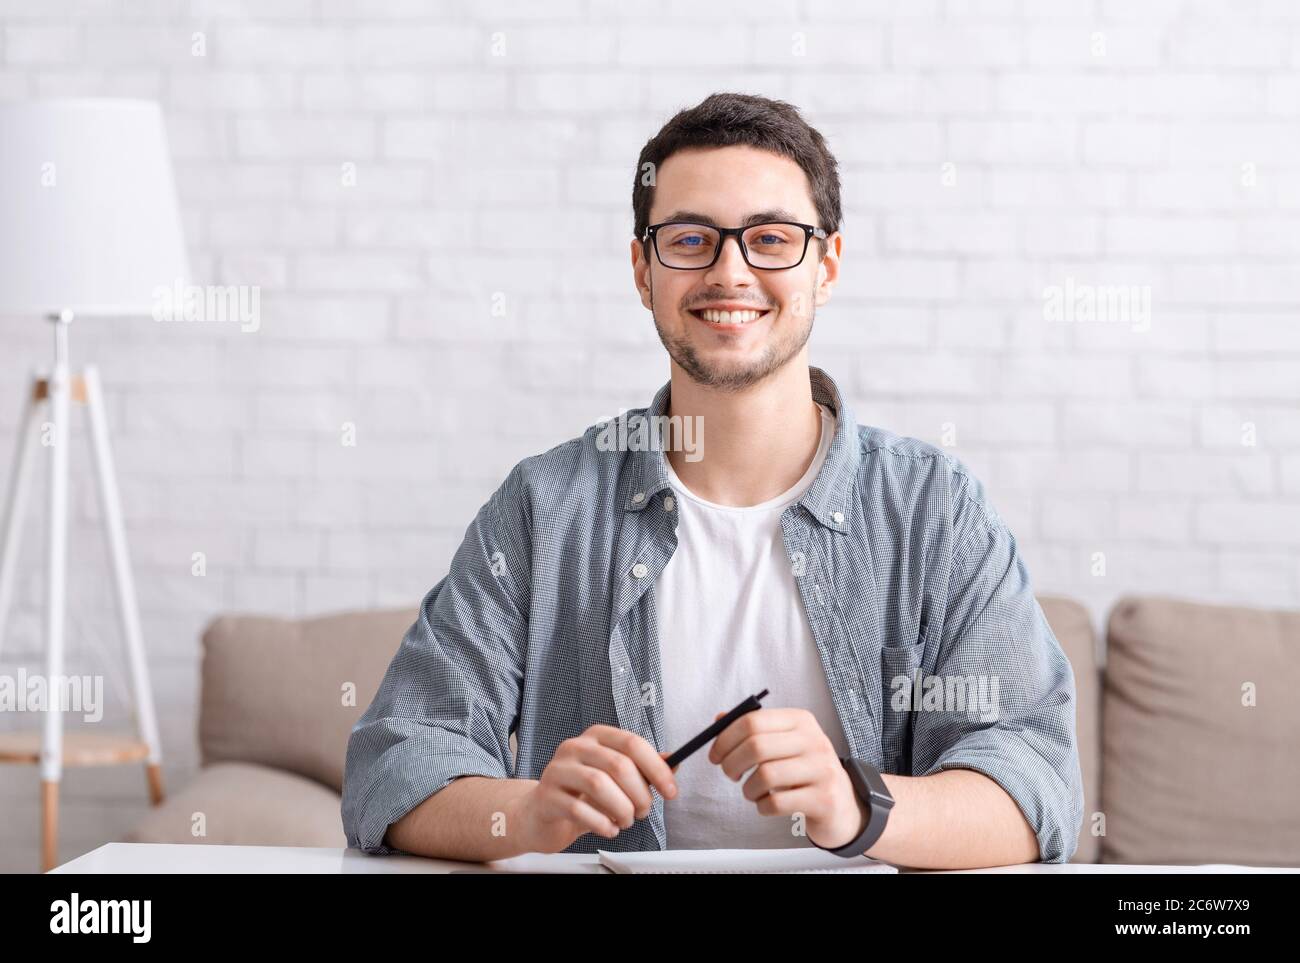 Online conference with team or chatting with followers. Man with glasses looks at webcam Stock Photo